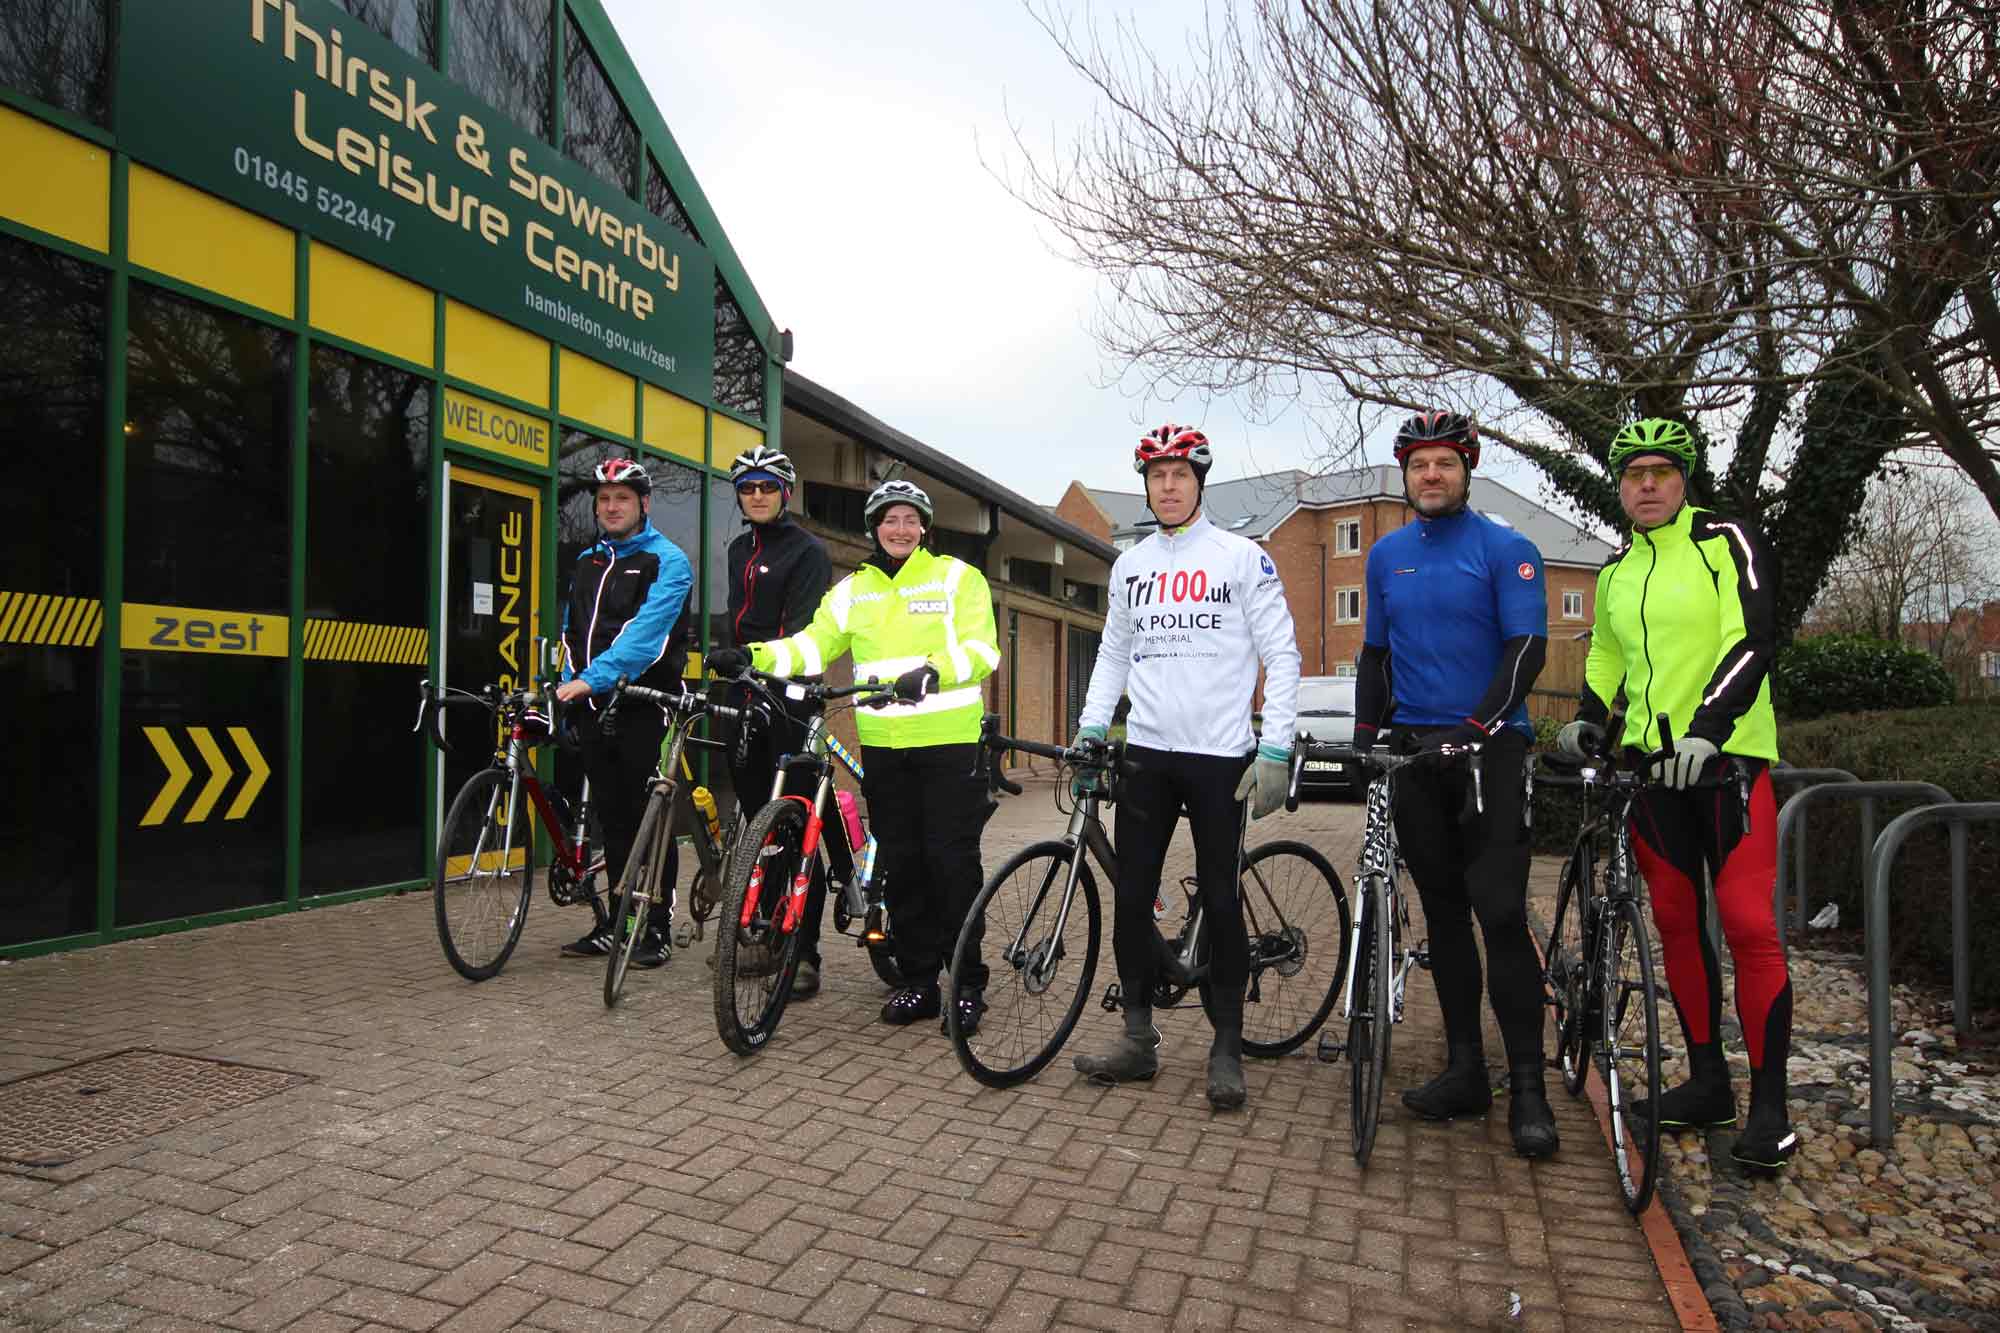 Paul sets off on the cycling leg with colleagues & friends of PC Bramma: left to right Glen Alderson, childhood friend of PC Bramma and British Transport Police officer, Dr Dave Murray of Hambleton Triathlon Team, PC Sarah Norman, Paul Landers, Detective Chief Inspector Dave Ellis,and retired PC, Mark Whitehouse